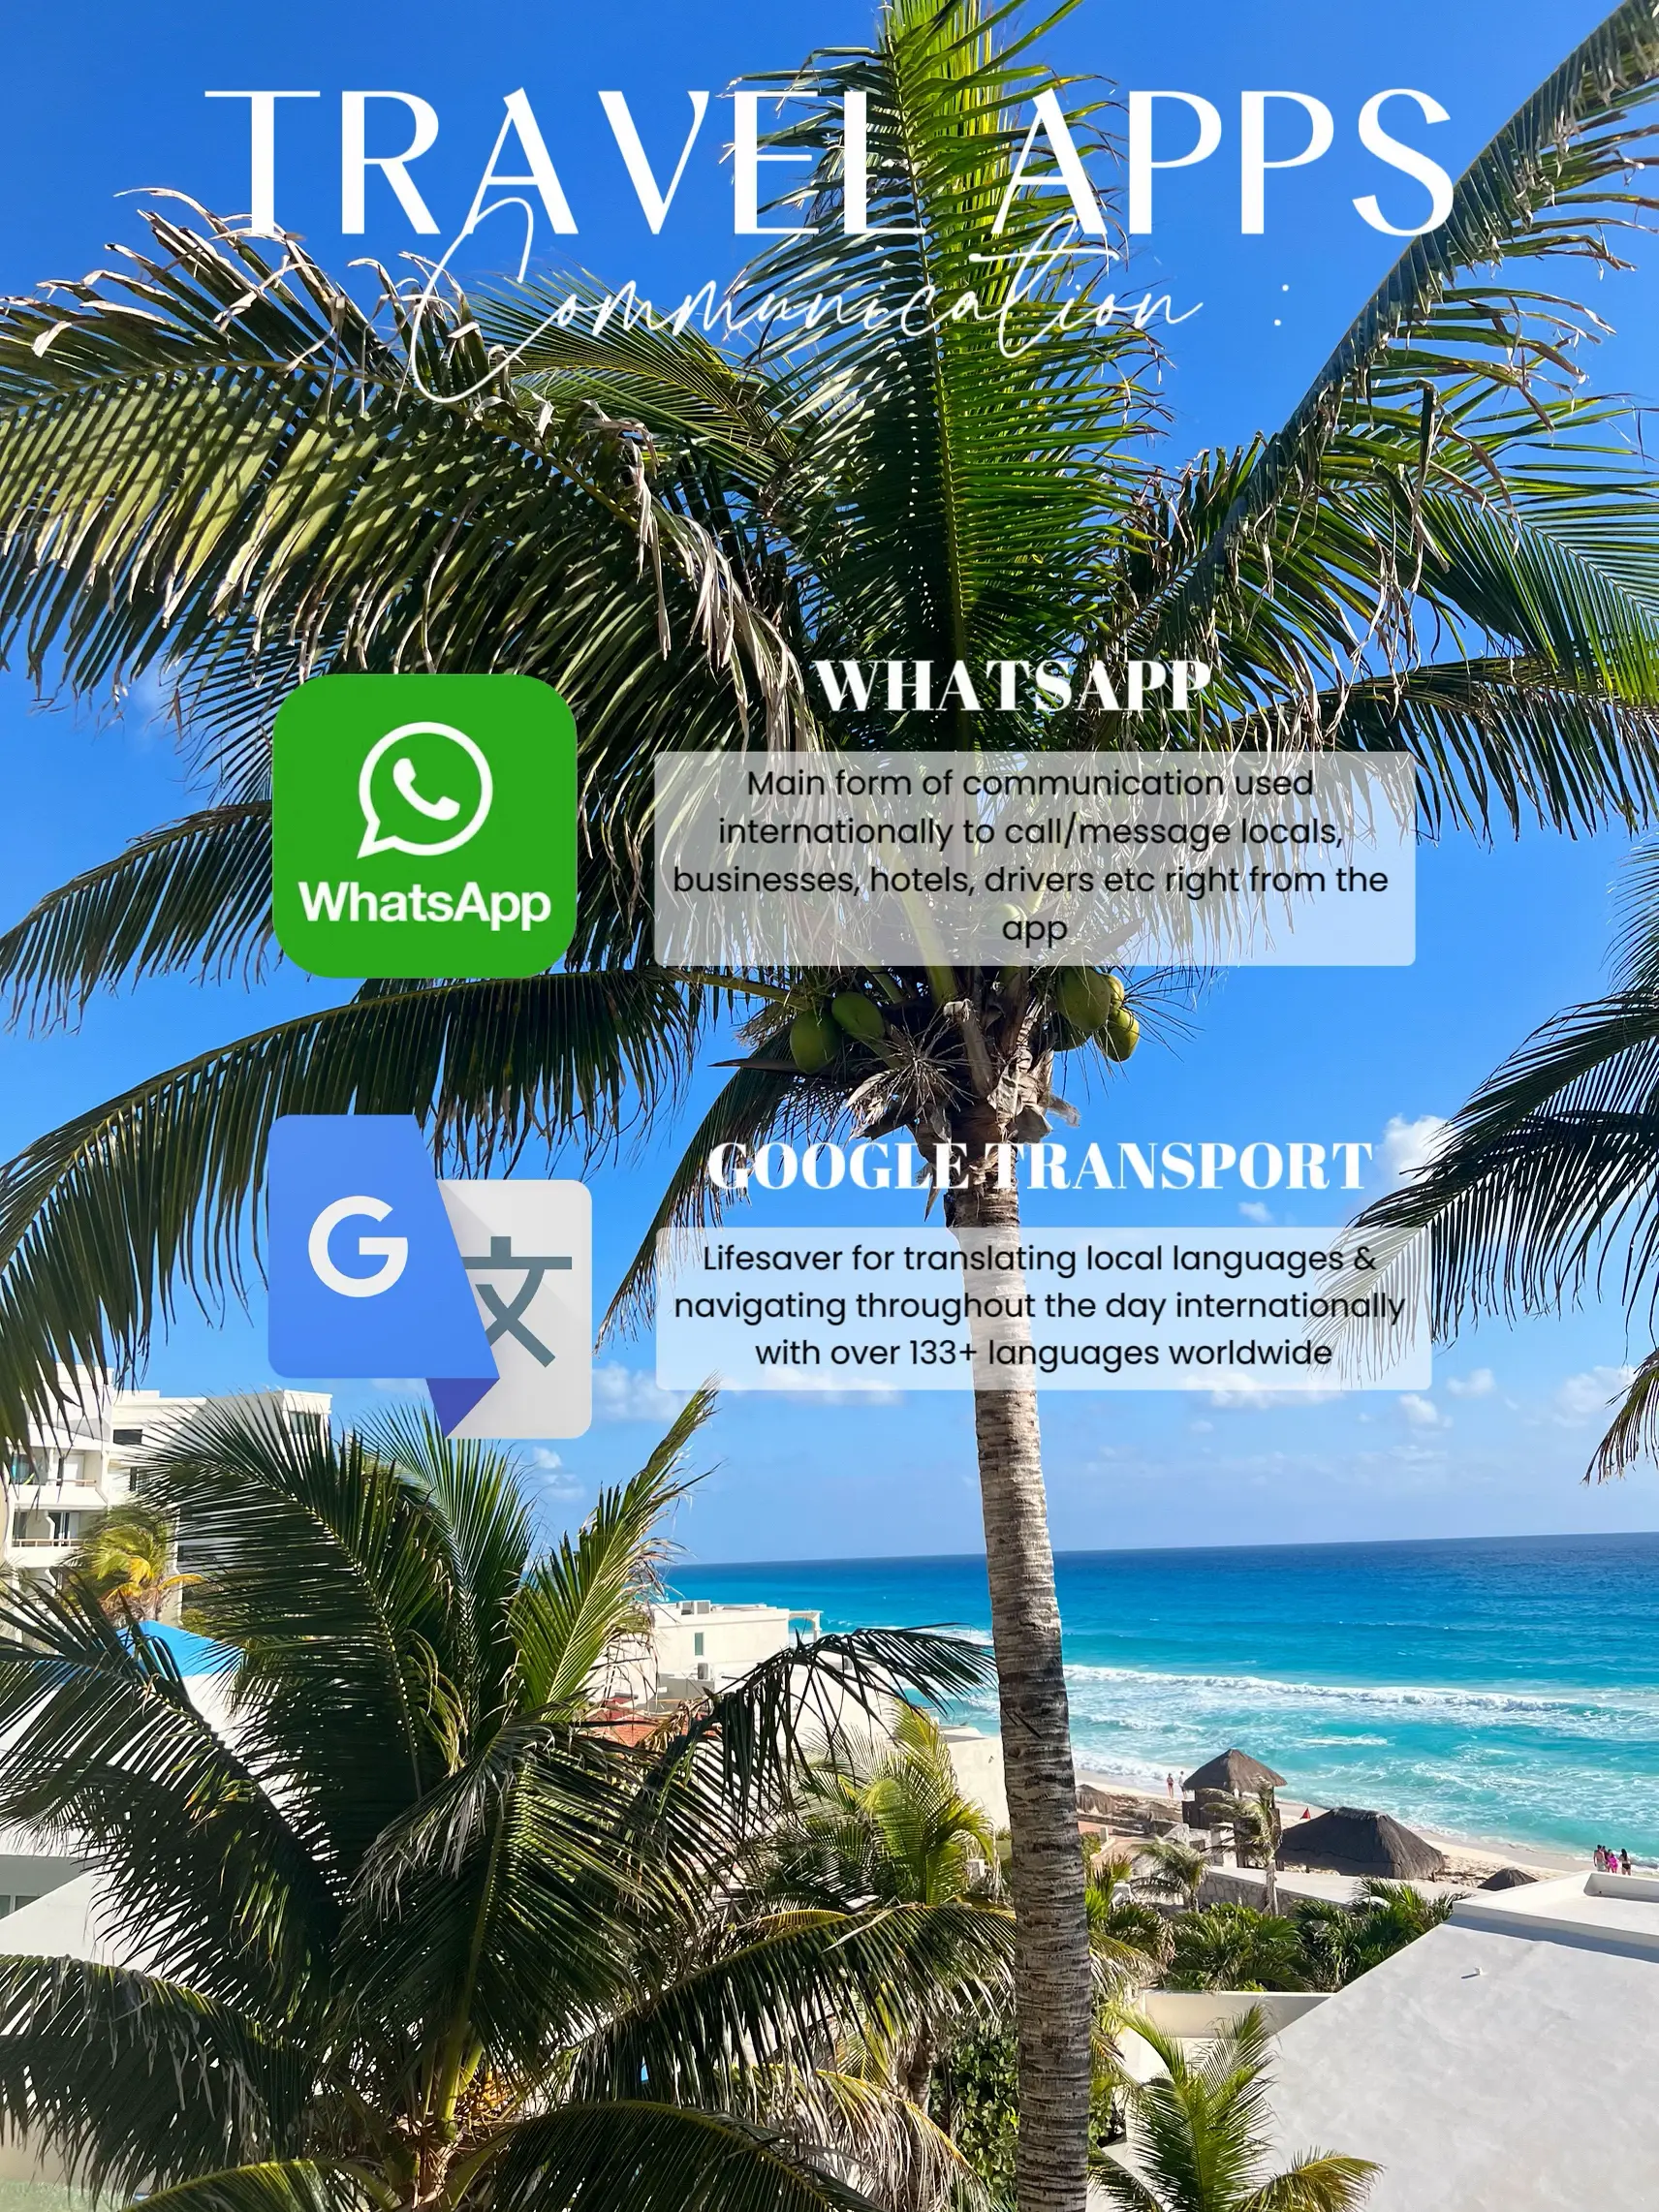  A screen showing a WhatsApp app with a